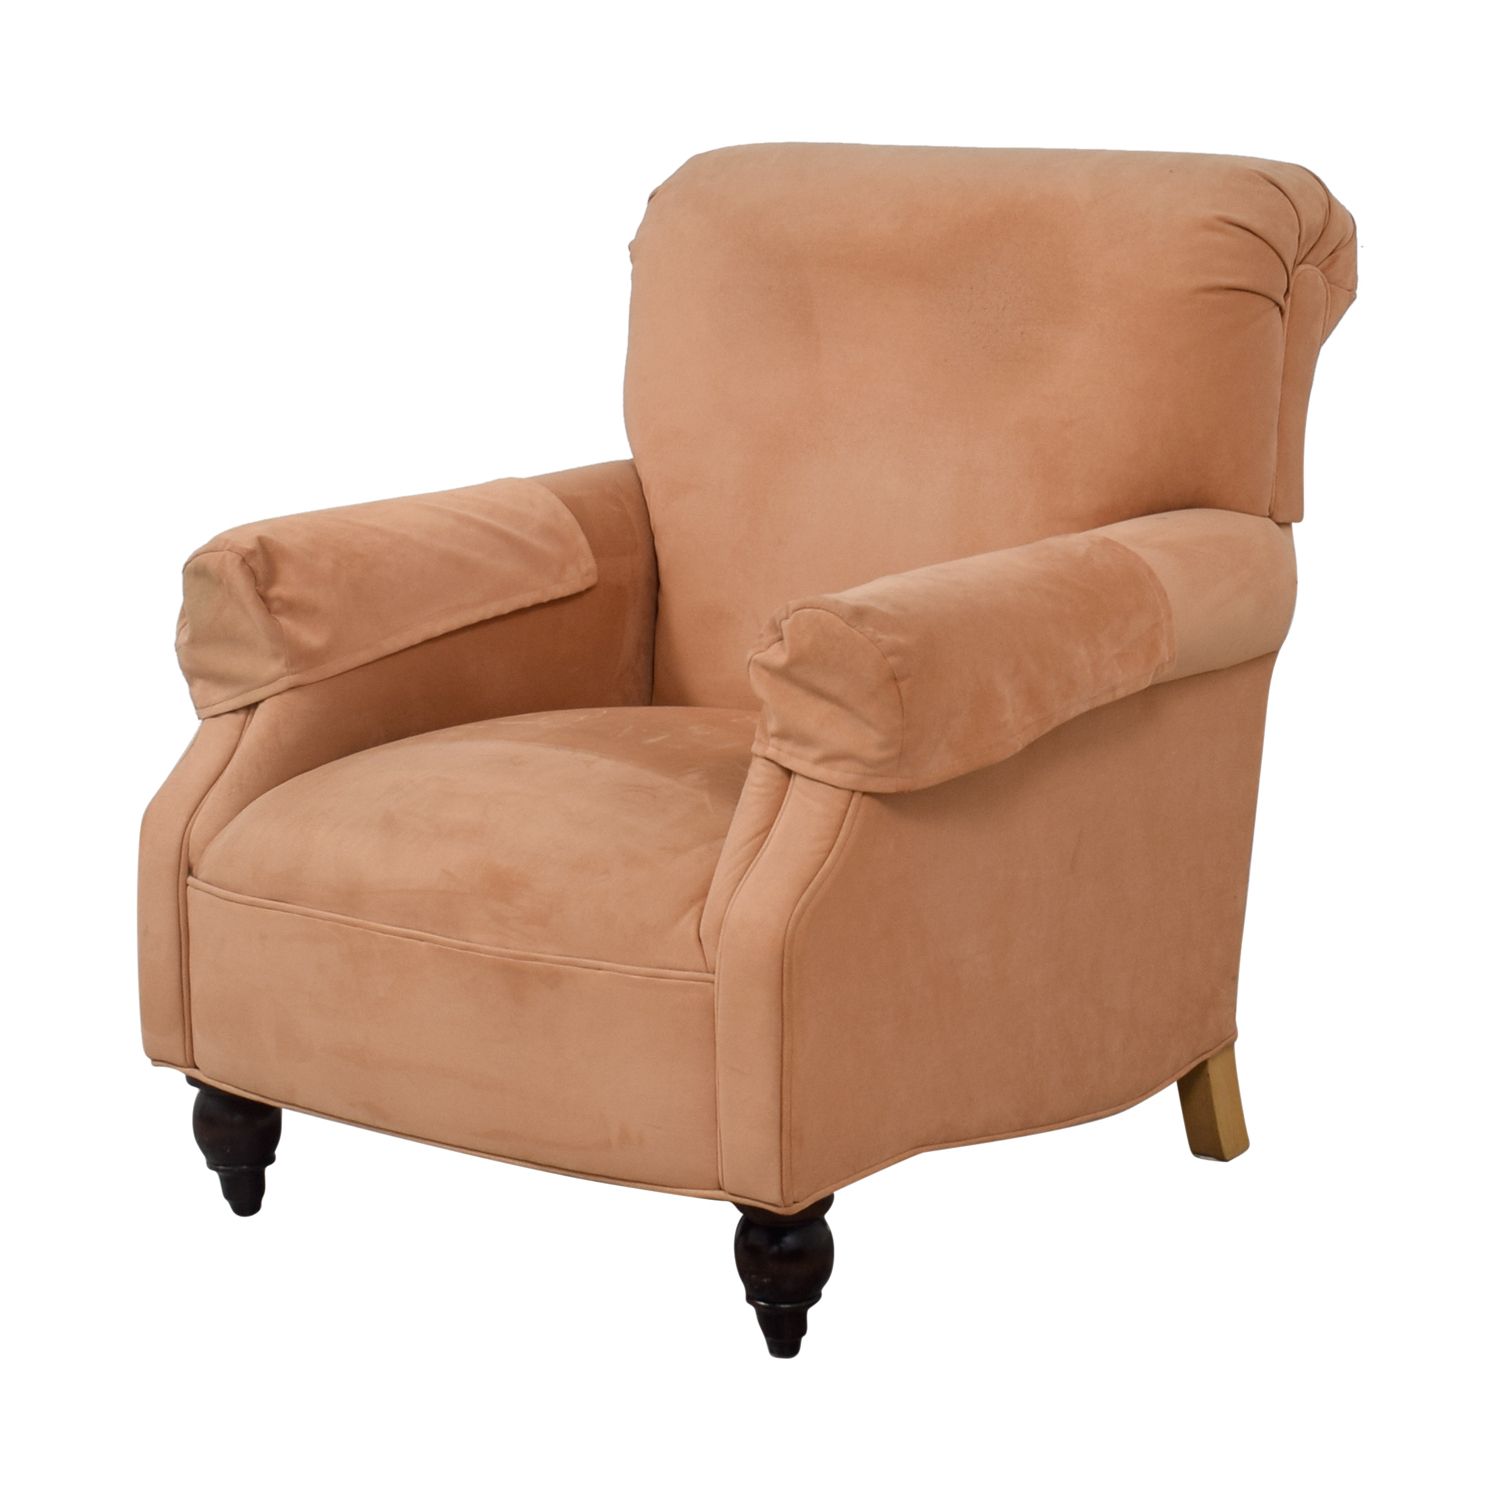 [%90% Off – Expressions Devon Microfiber Salmon Accent Chair / Chairs Pertaining To Recent Devon Ii Swivel Accent Chairs|devon Ii Swivel Accent Chairs Pertaining To Recent 90% Off – Expressions Devon Microfiber Salmon Accent Chair / Chairs|most Recently Released Devon Ii Swivel Accent Chairs In 90% Off – Expressions Devon Microfiber Salmon Accent Chair / Chairs|well Liked 90% Off – Expressions Devon Microfiber Salmon Accent Chair / Chairs With Devon Ii Swivel Accent Chairs%] (View 13 of 20)